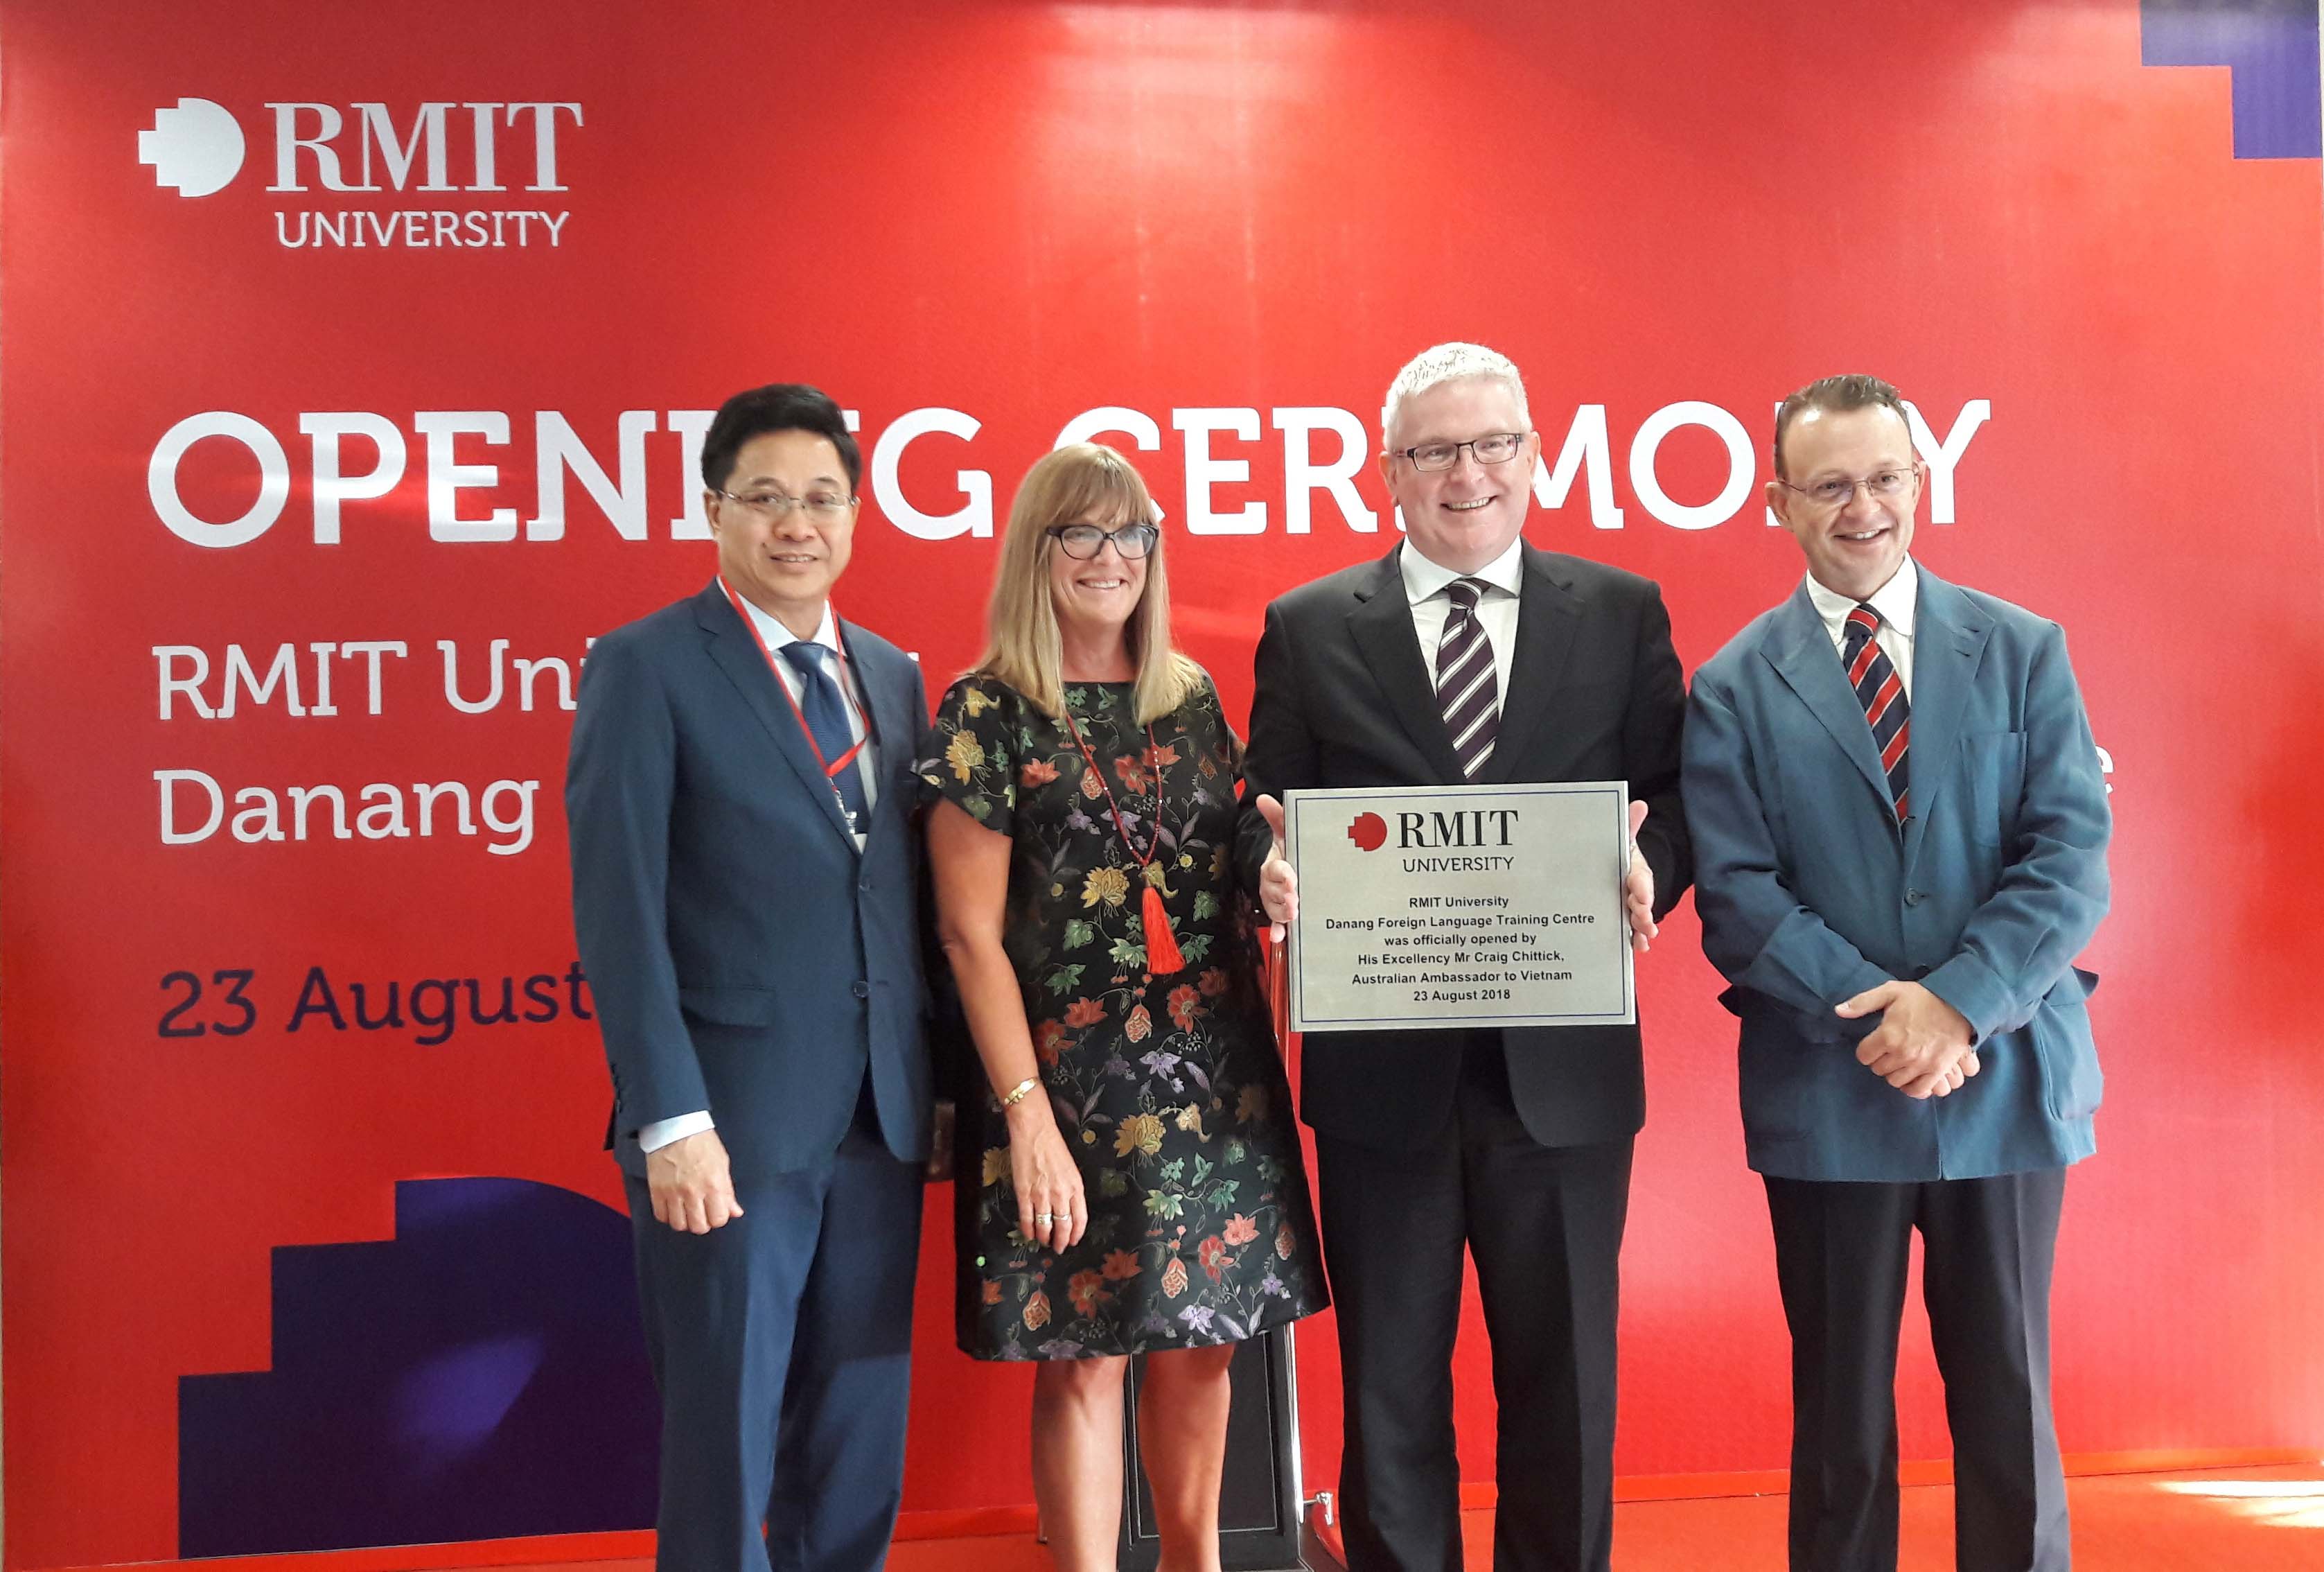 The RMIT University Danang Foreign Language Training Centre was officially opened on 23 August 2018 by His Excellency Mr Craig Chittick (second from right), Australian Ambassador to Vietnam, in the presence of Mr Lam Quang Minh, Director of the Danang Department of Foreign Affairs (left); Ms Karen Lanyon, Australian Consul-General to Ho Chi Minh City (second from left); and Mr Sánchez-Barroso González José, the Spanish Deputy Consul General in Danang (right).